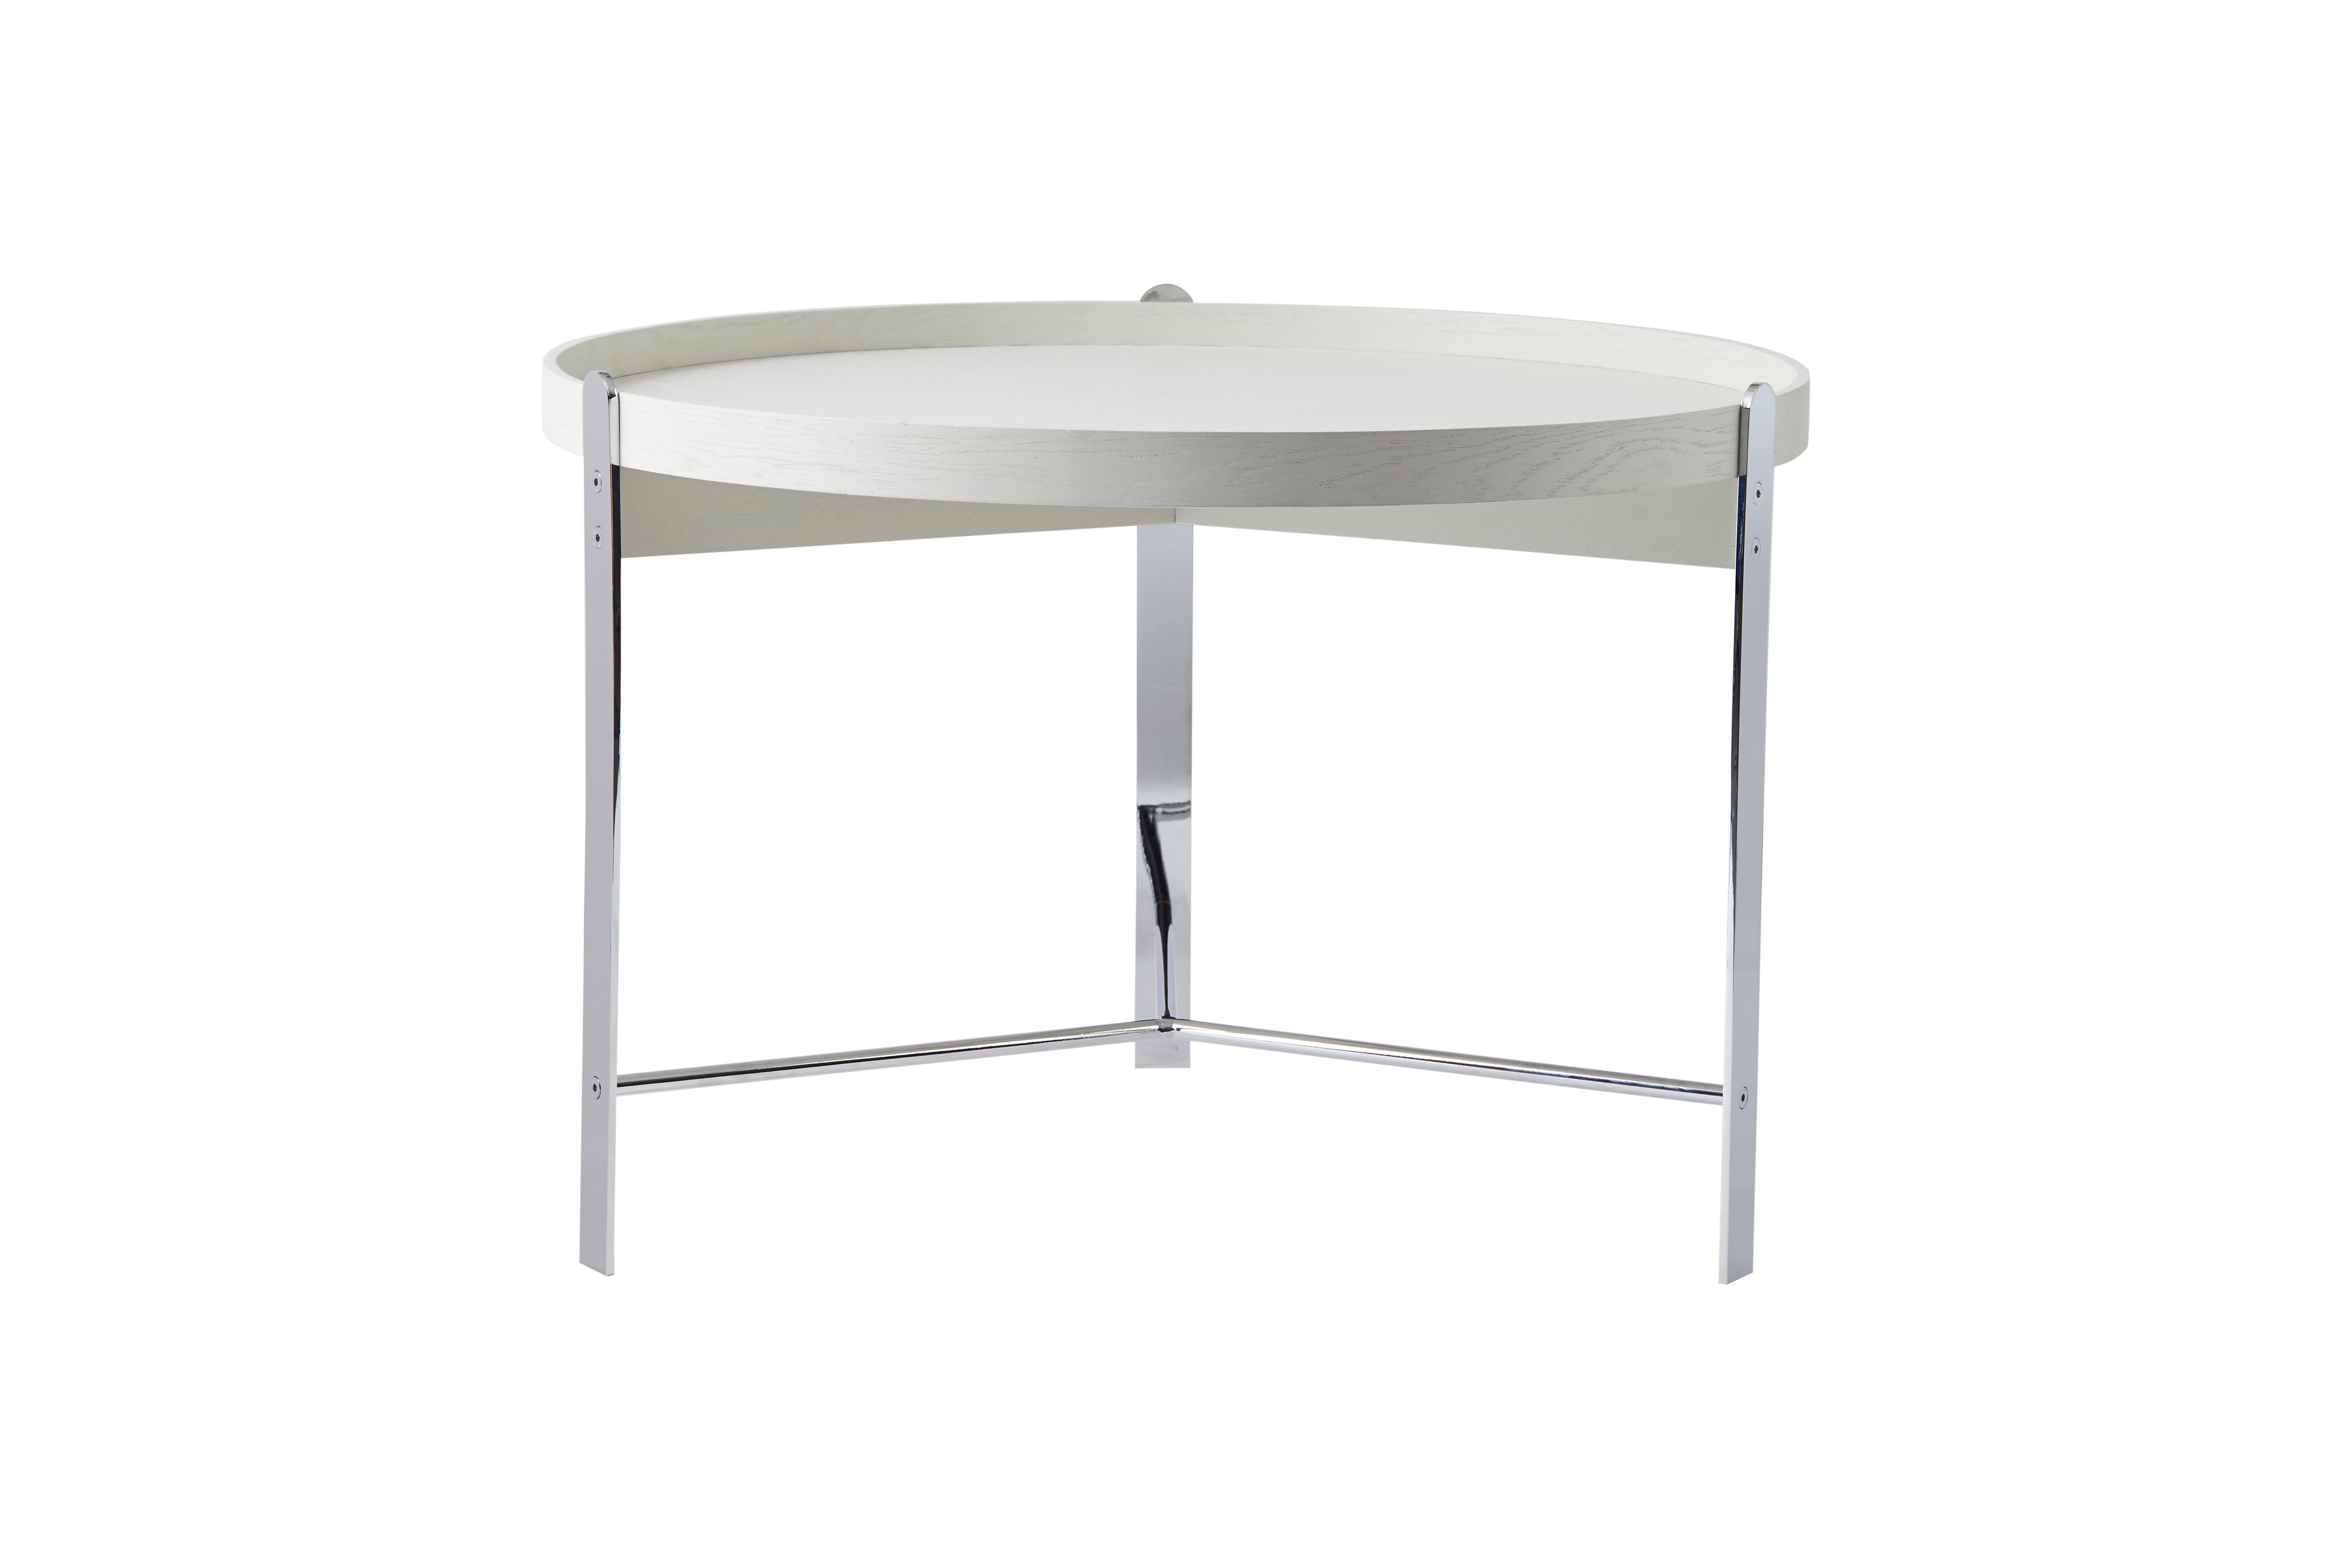 For Sale: White (White Oak/Chrome) Compose Coffee Table, by Charlotte Høncke from Warm Nordic